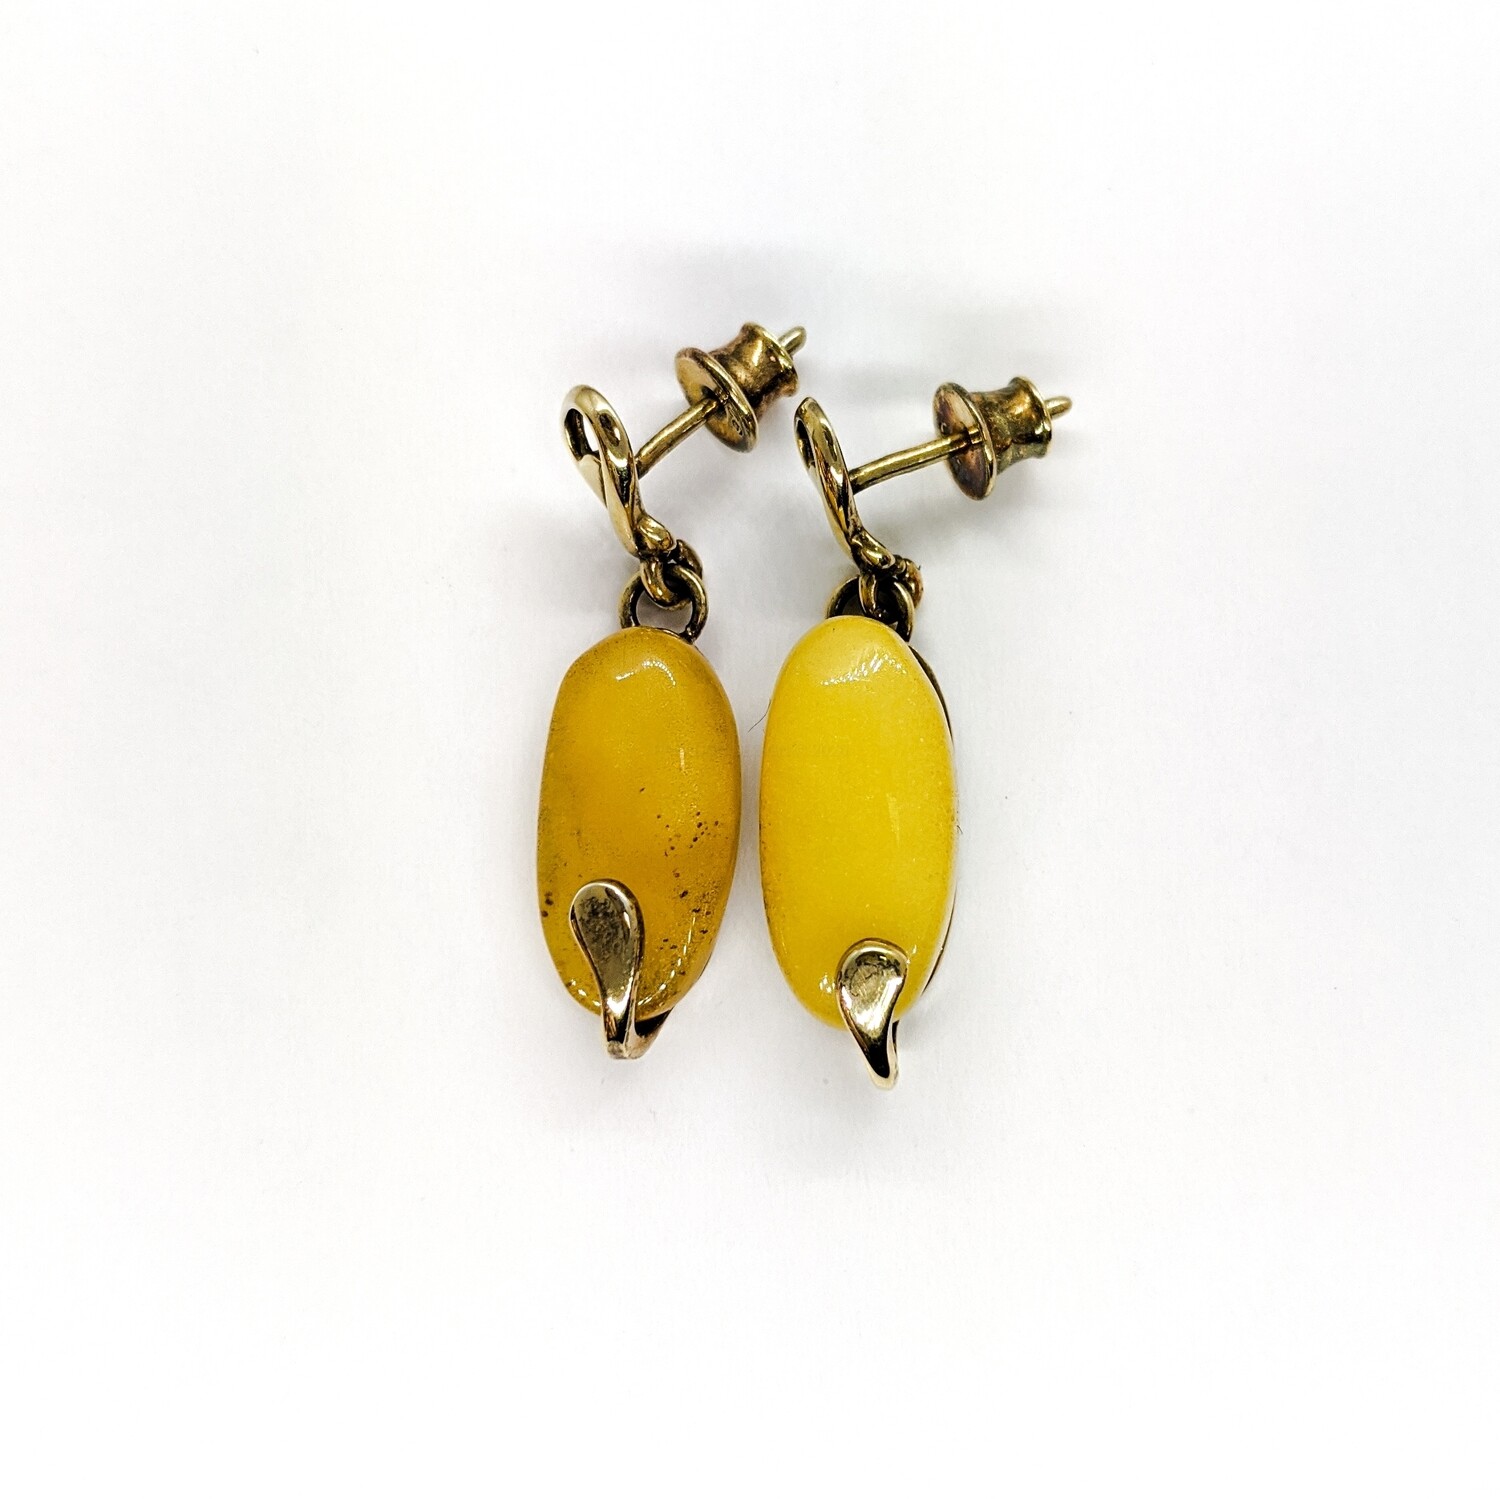 Silver gilded earrings with amber